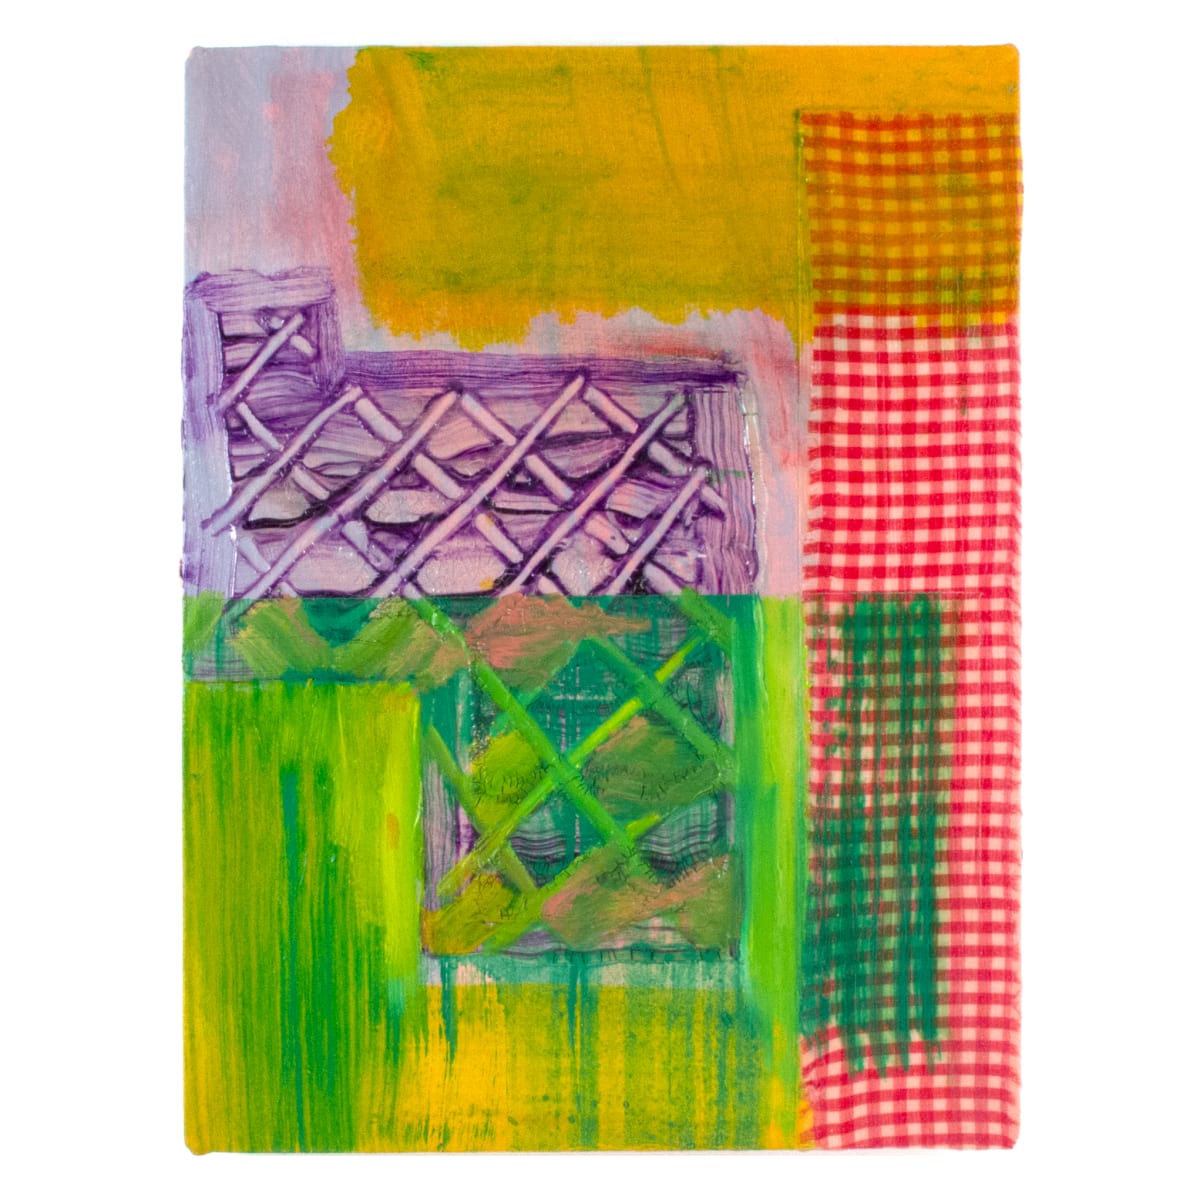 Gingham 8 by Bruce Price  Image: Gingham 8
acrylic & fabric on canvas
12"x9"